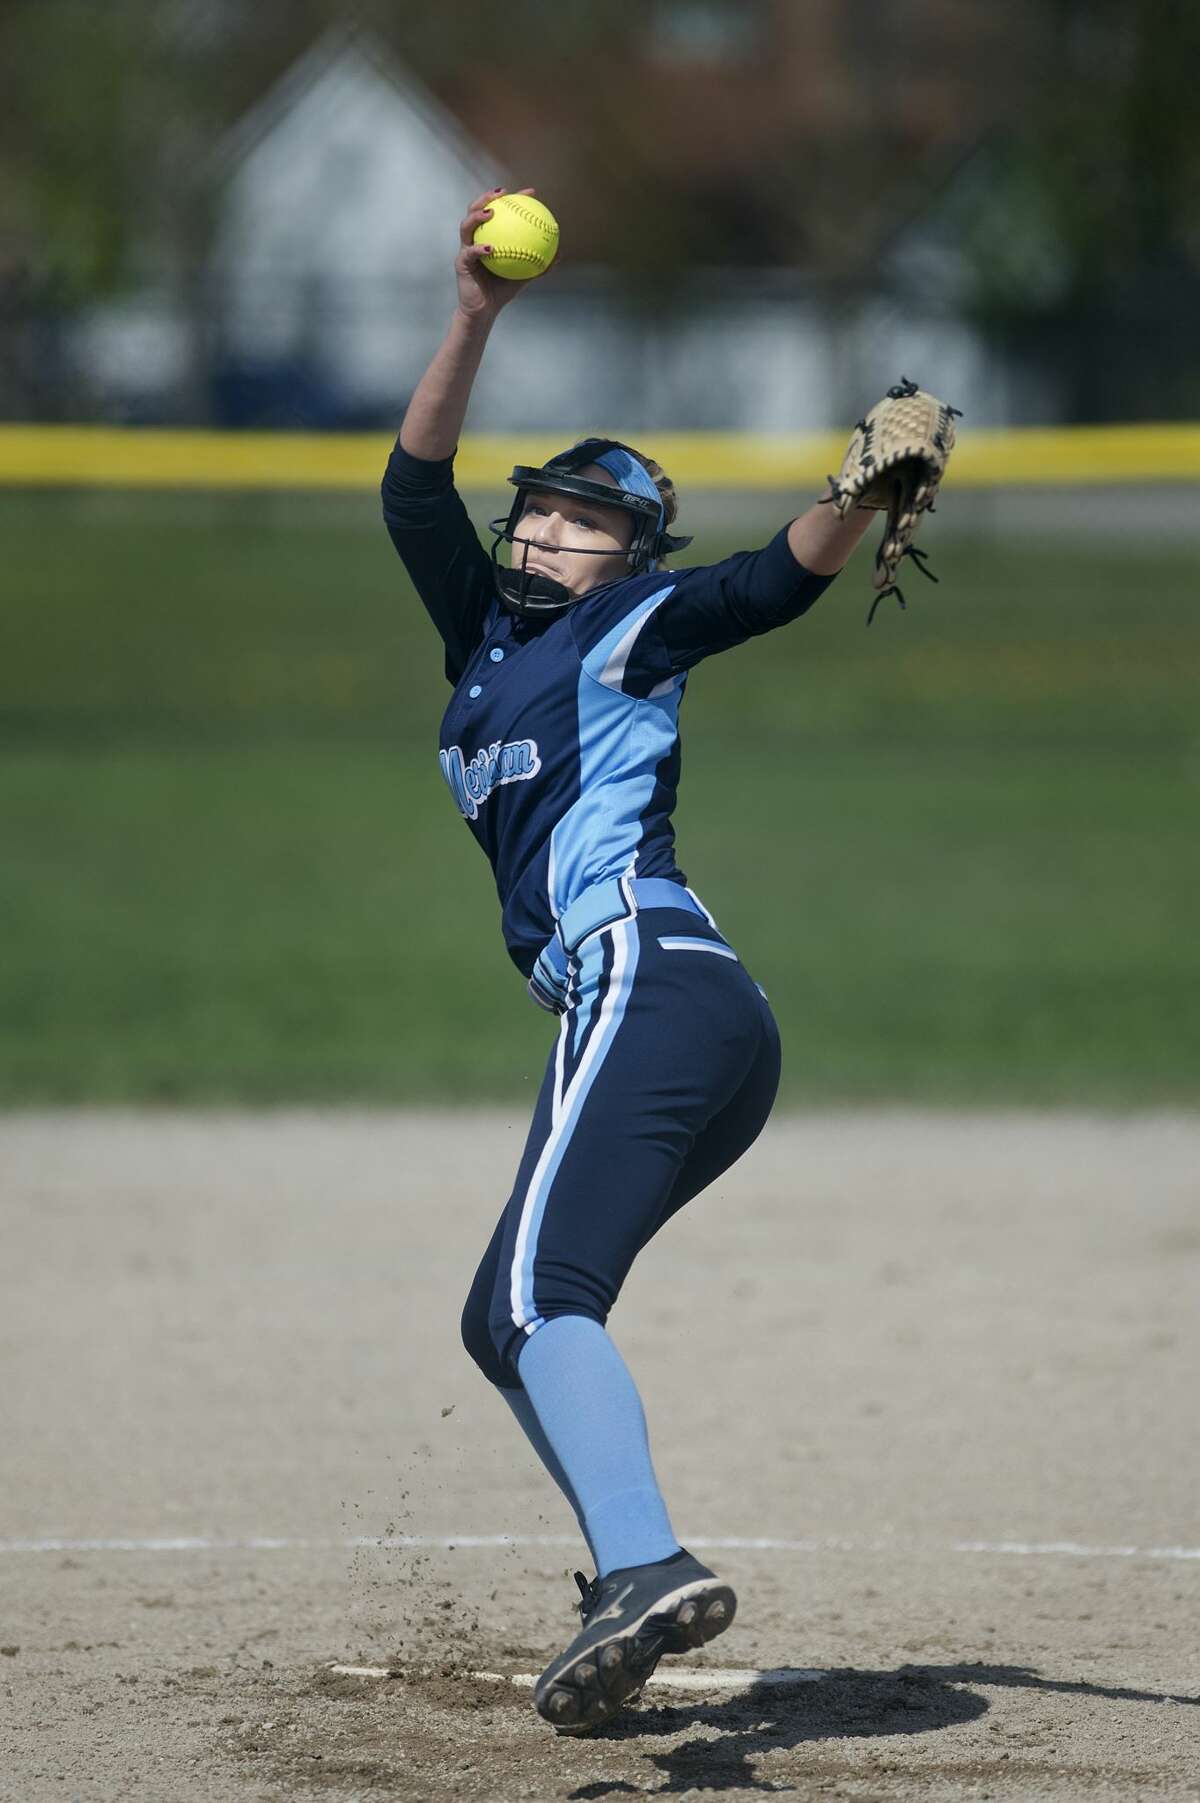 Meridian's Kaylee Lavack prepares to pitch in the first inning of the Wednesday afternoon game against Beaverton.